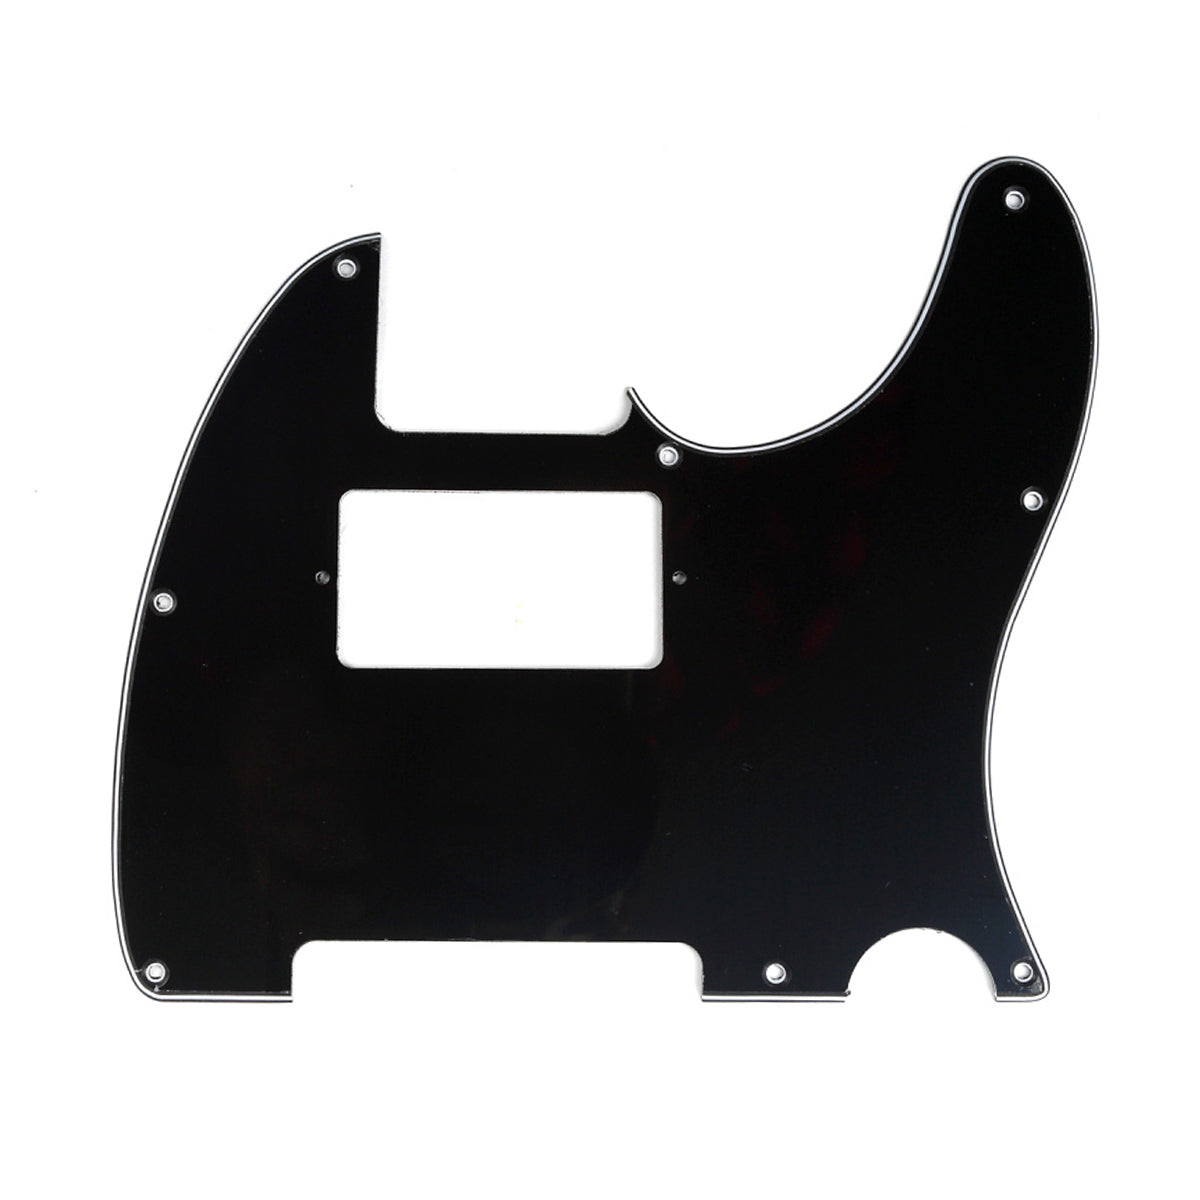 Musiclily 8 Hole Guitar Tele Pickguard Humbucker HH for USA/Mexican Made Fender Standard Telecaster Modern Style,3Ply Black